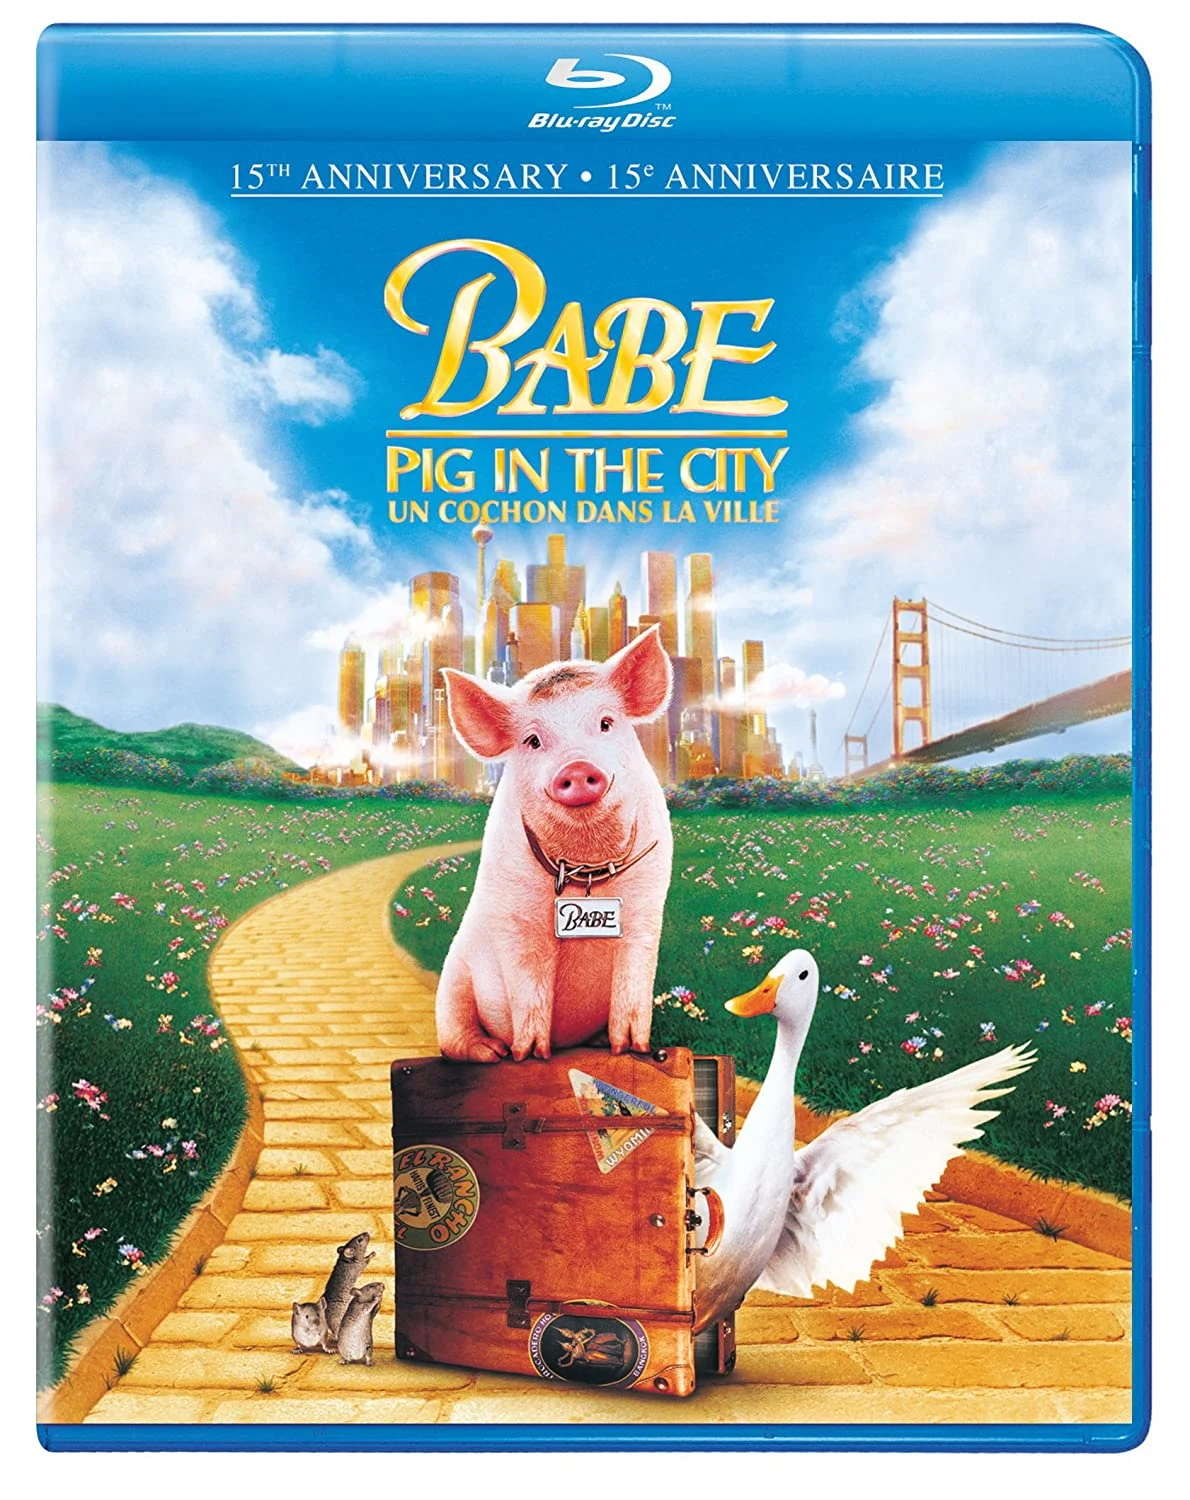 Babe: Pig in the City (Blu-ray) on MovieShack